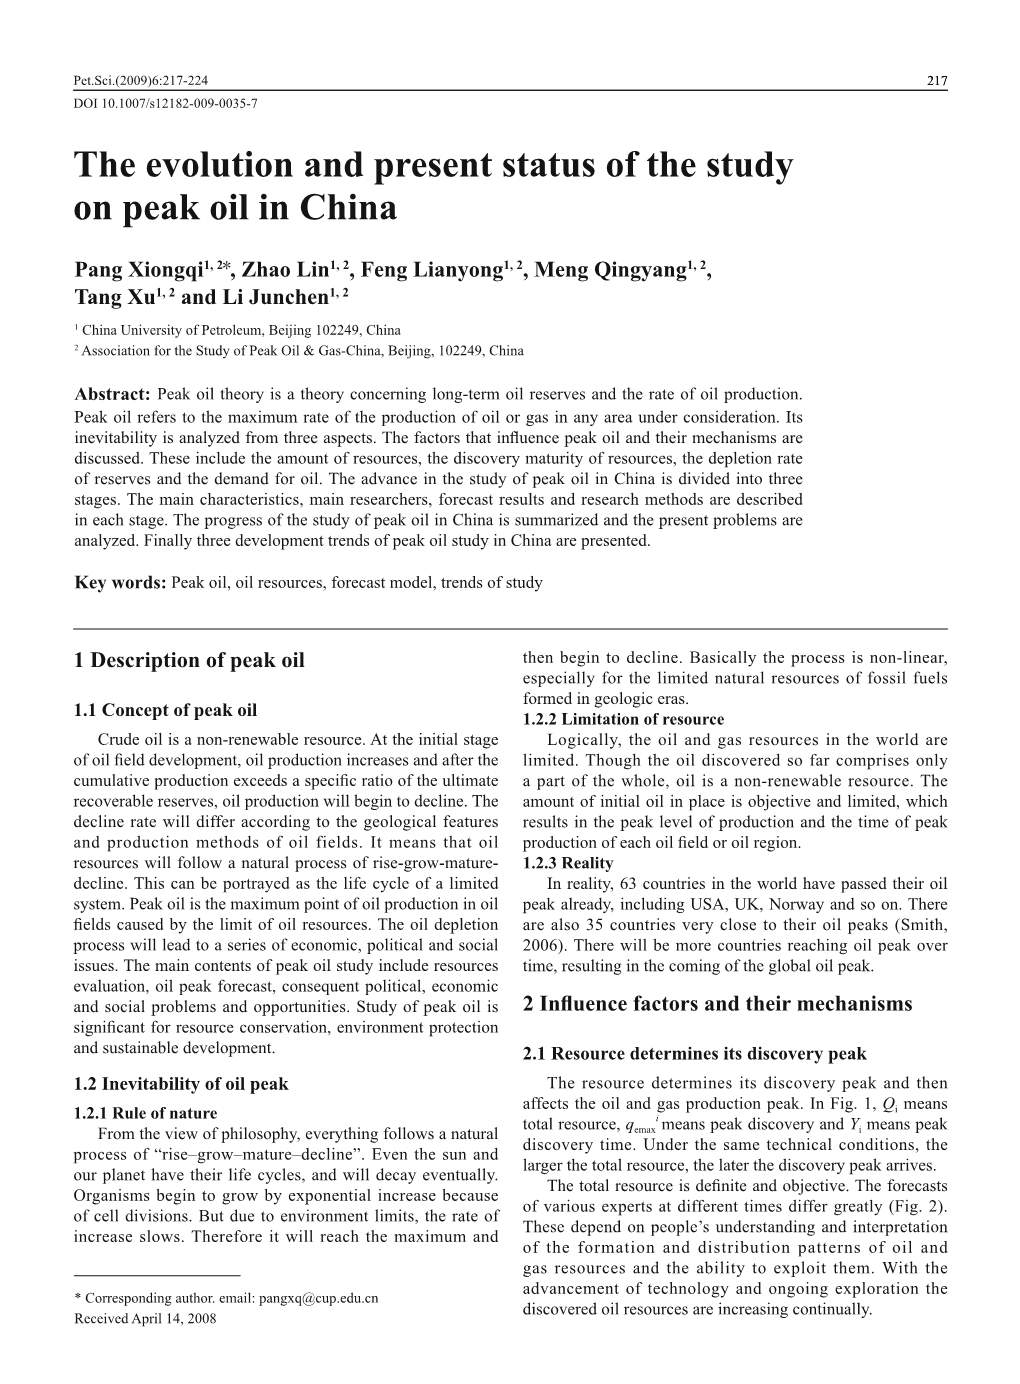 The Evolution and Present Status of the Study on Peak Oil in China